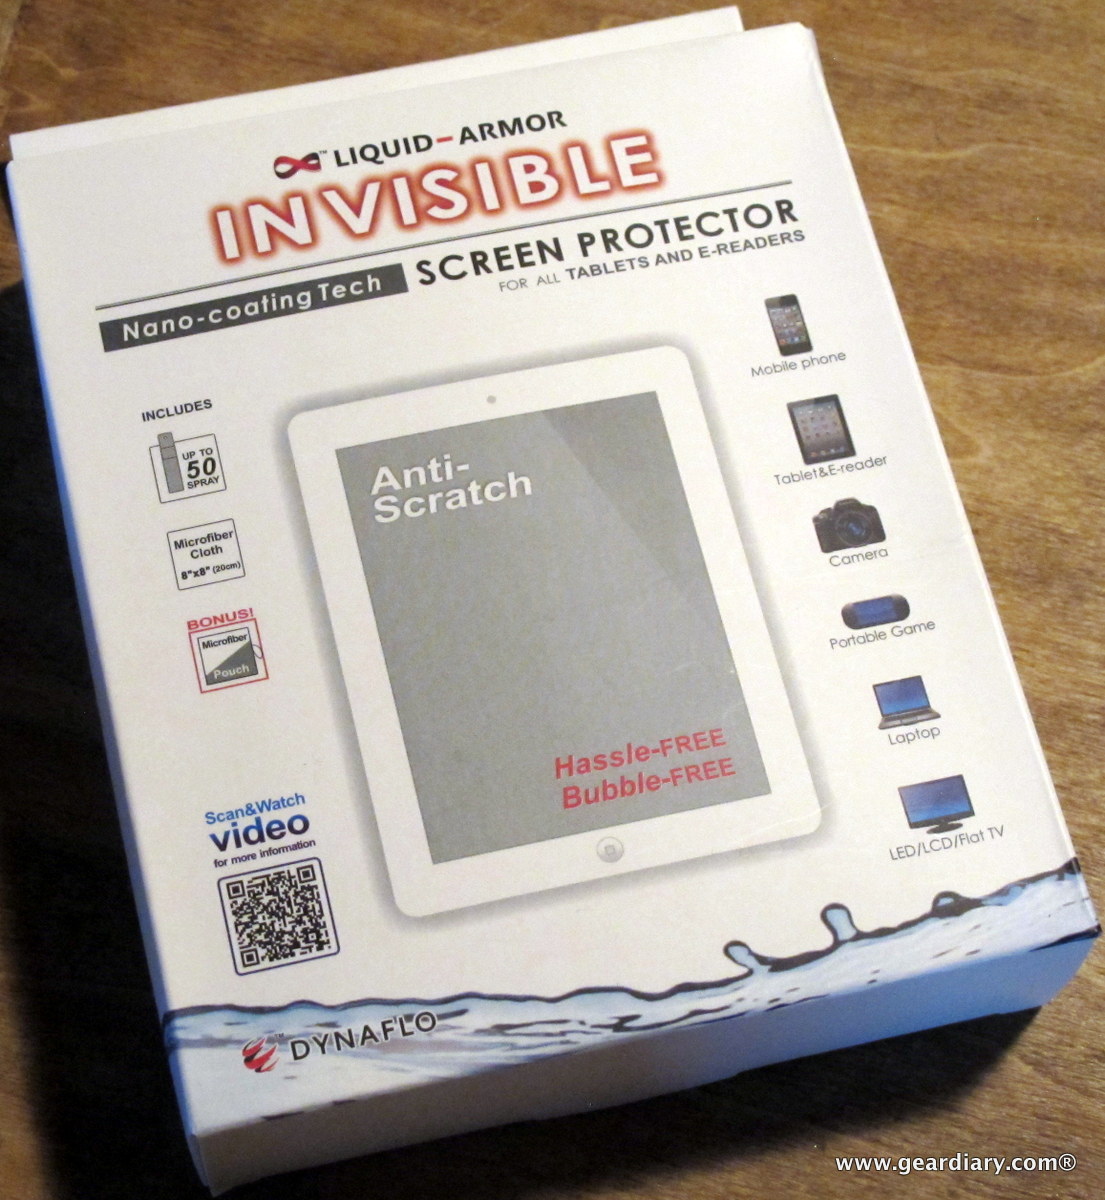 Liquid-Armor Invisible Nano-Coating Tech Screen Protector for Tablets and eReaders Review